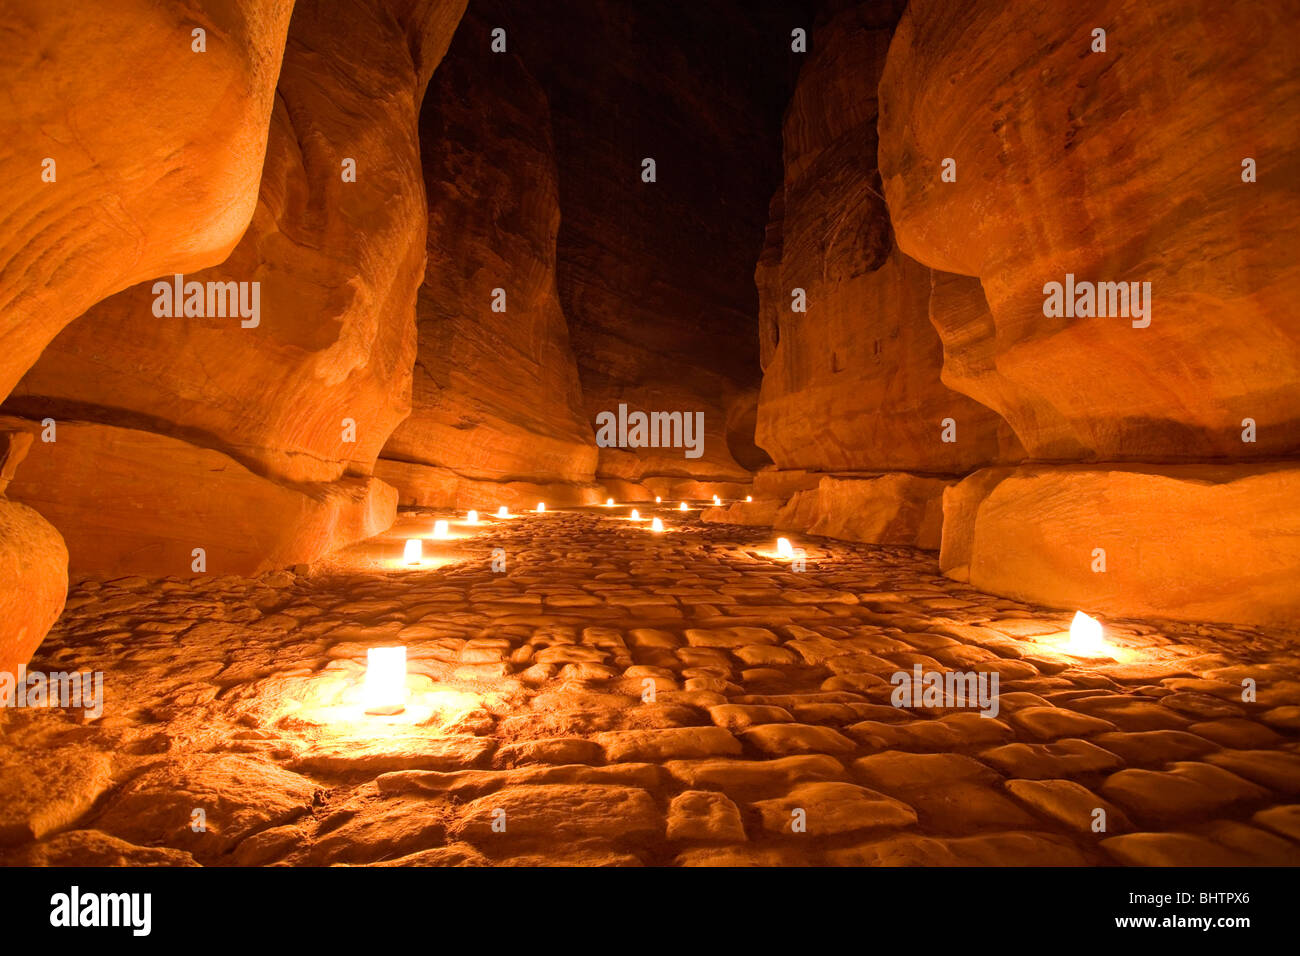 The Al-Siq Canyon leading to the Treasury lit up by candles for Petra by night in Wadi Musa, Jordan. Stock Photo